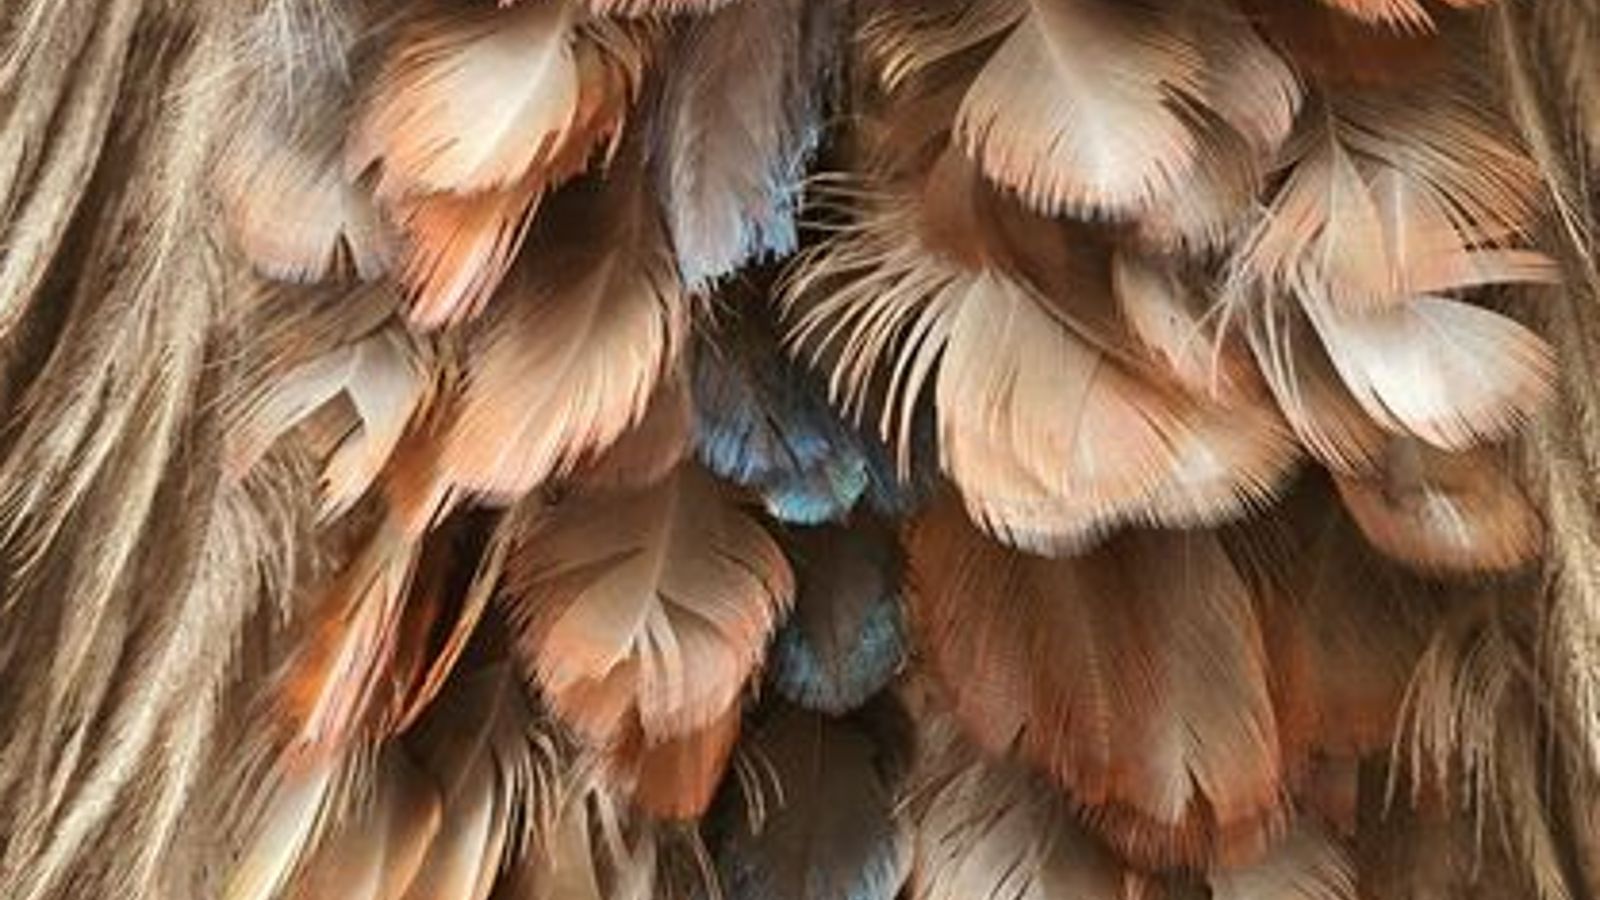 A close up of various colourful bird feathers.